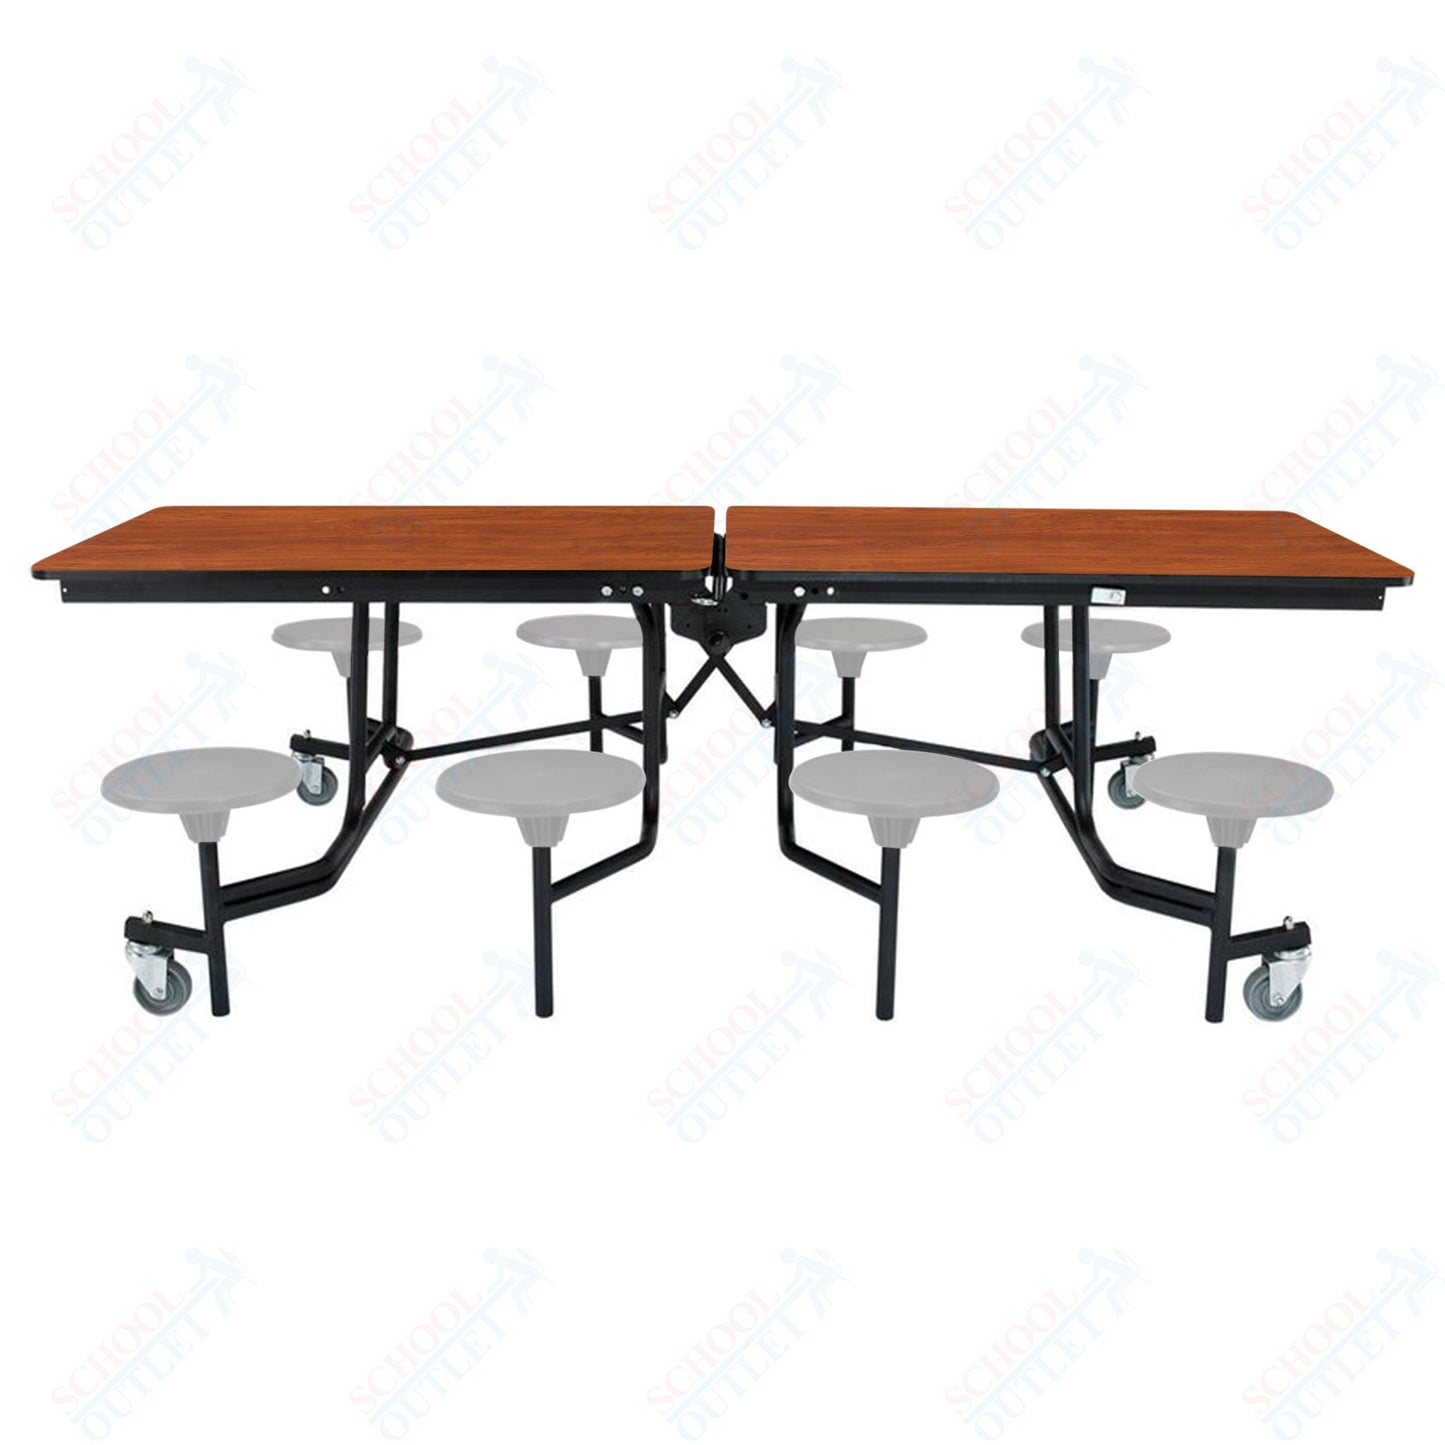 NPS Mobile Cafeteria Table - 30" W x 8' L - 8 Stools - Plywood Core - Protect Edge - Chrome Frame